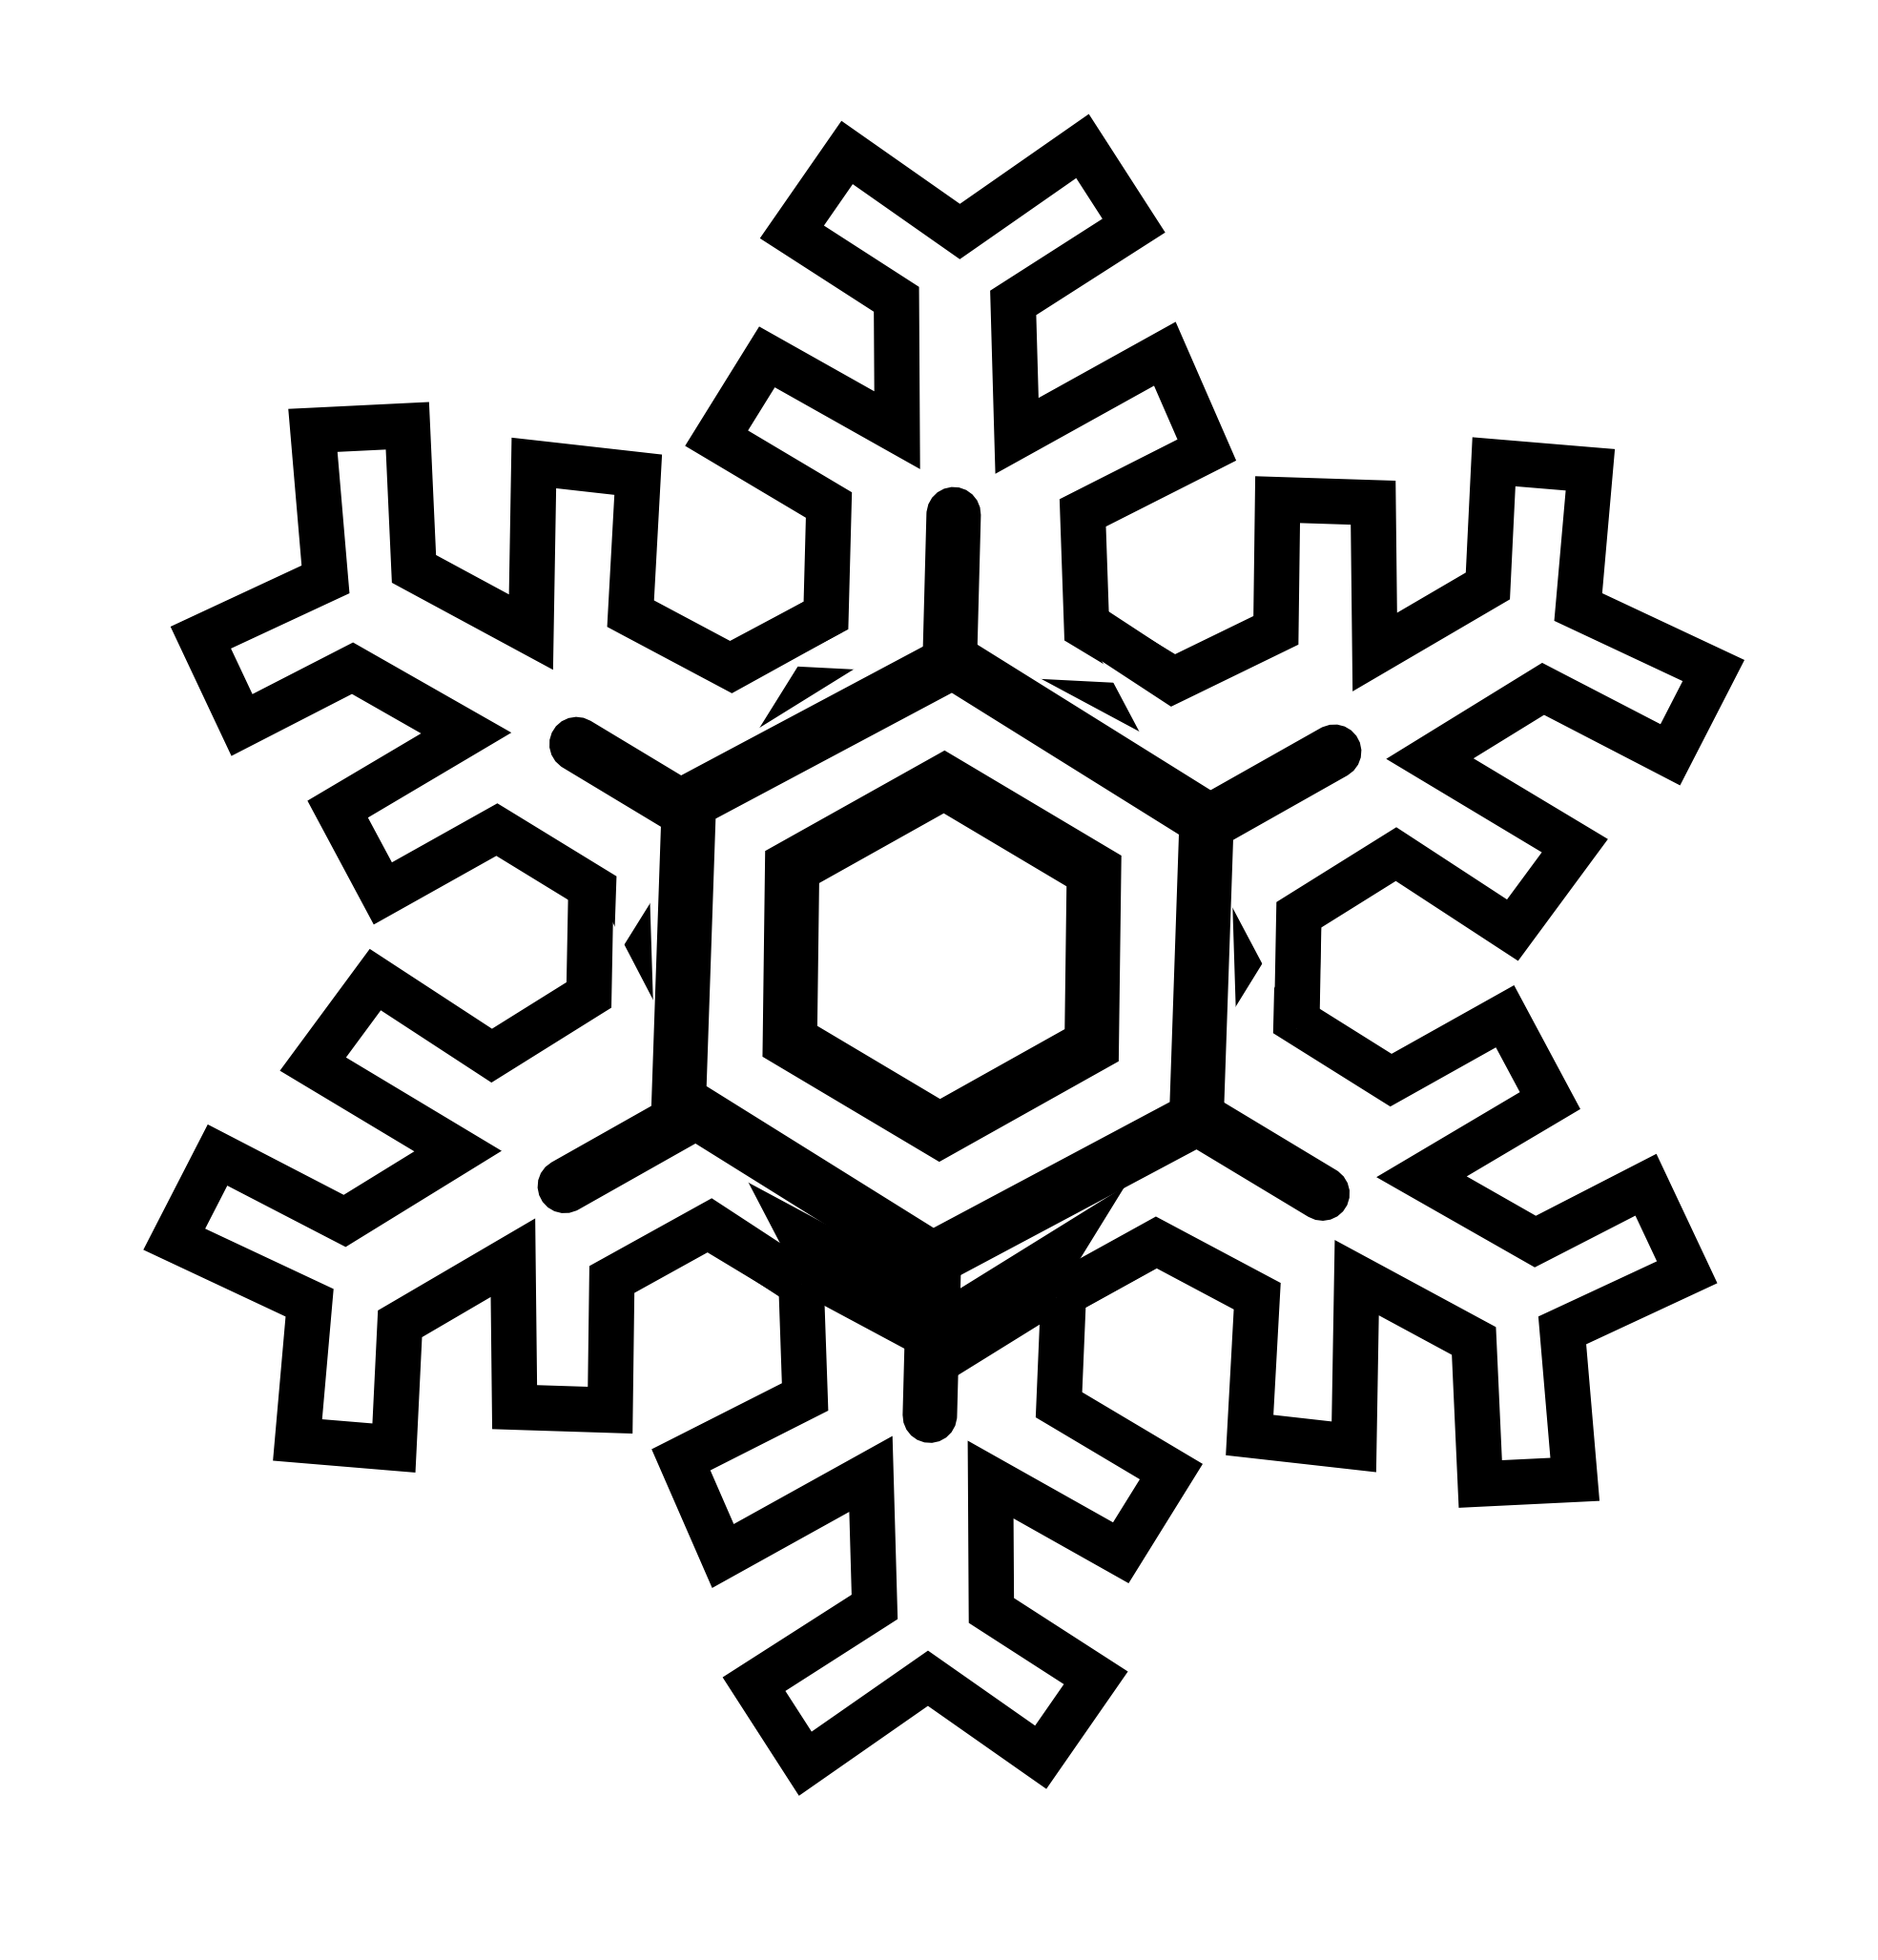 Black And White Snowflake Clip Art Hd Images 3 Hd Wallpapers 